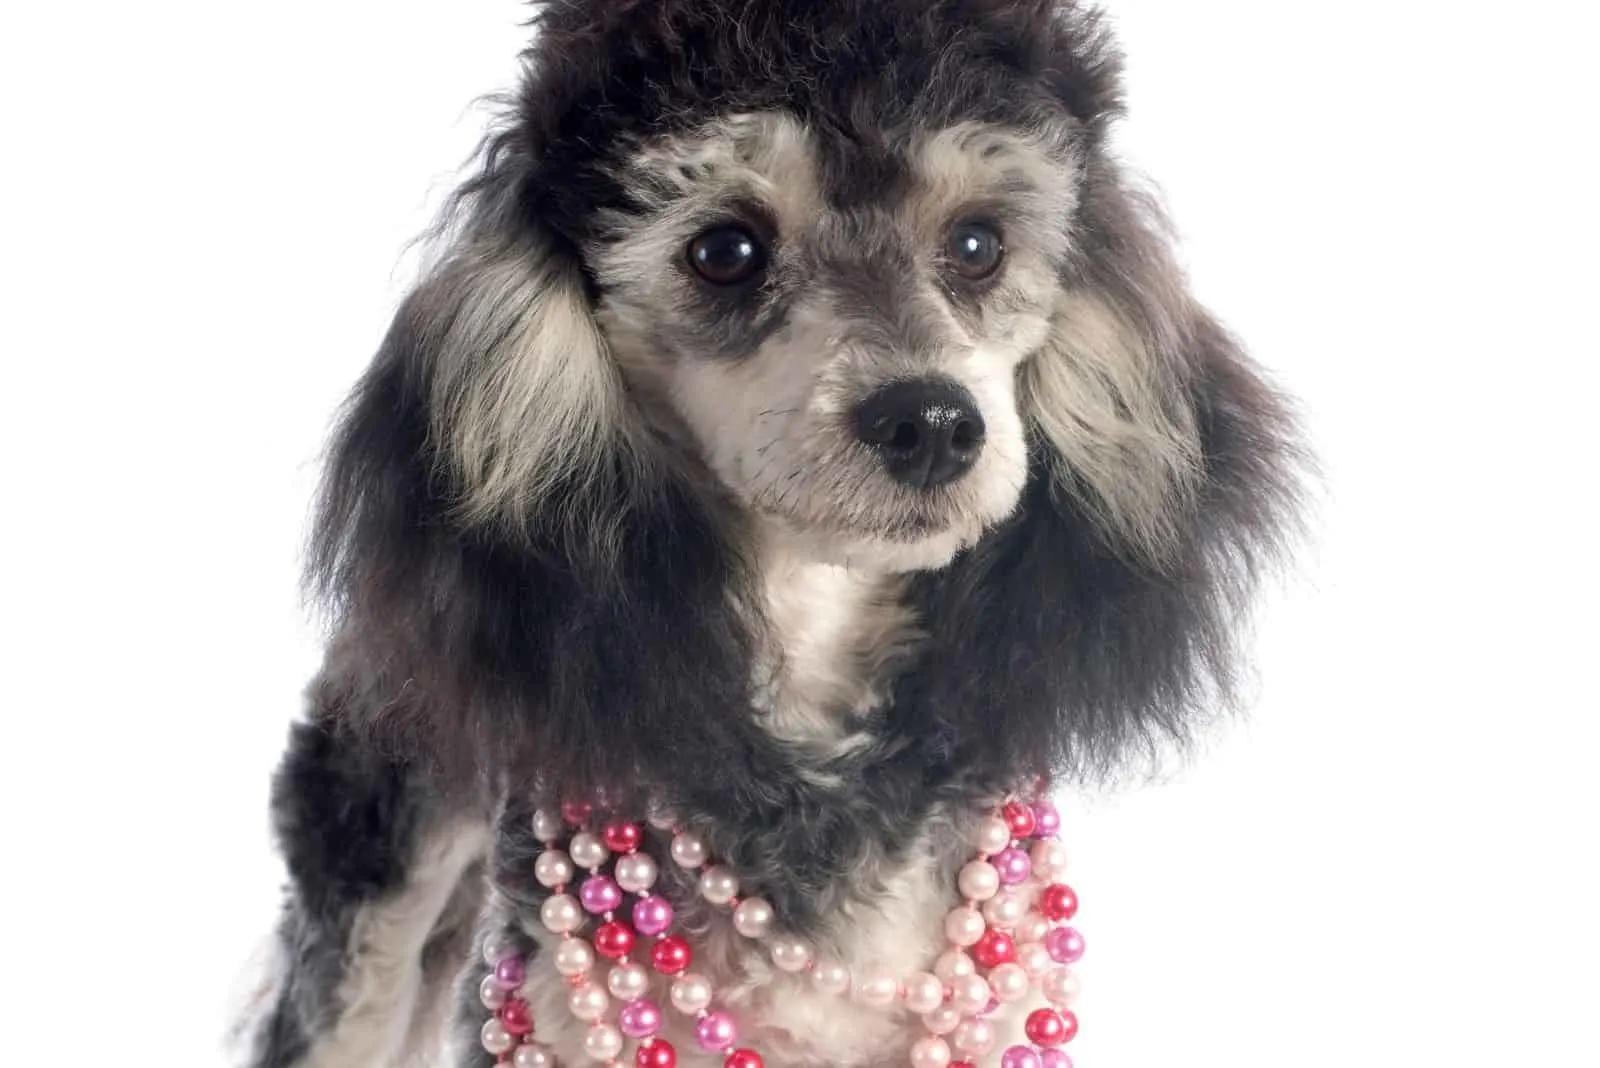 phantom poodle dog adorned with necklace standing in white background